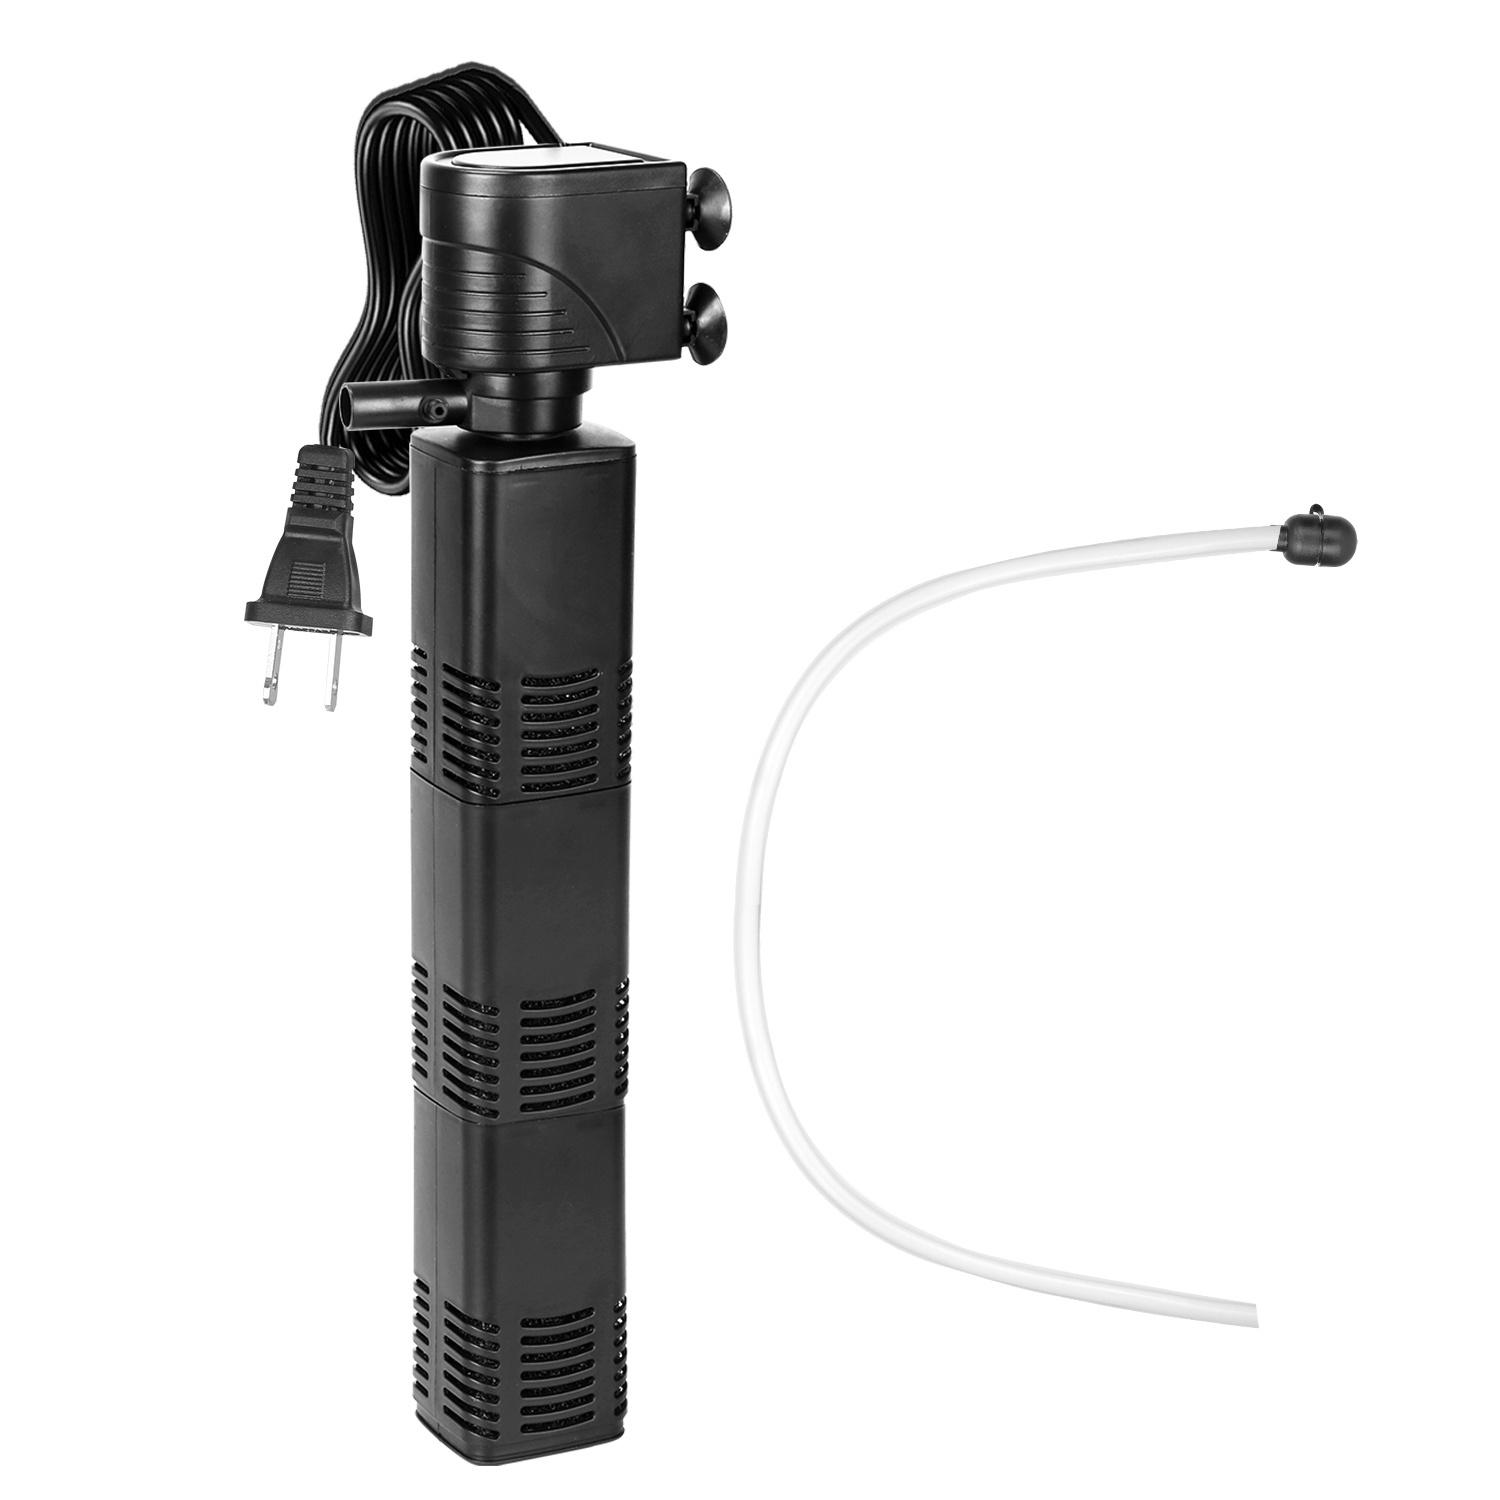 Aquarium filter with power cord and hose.